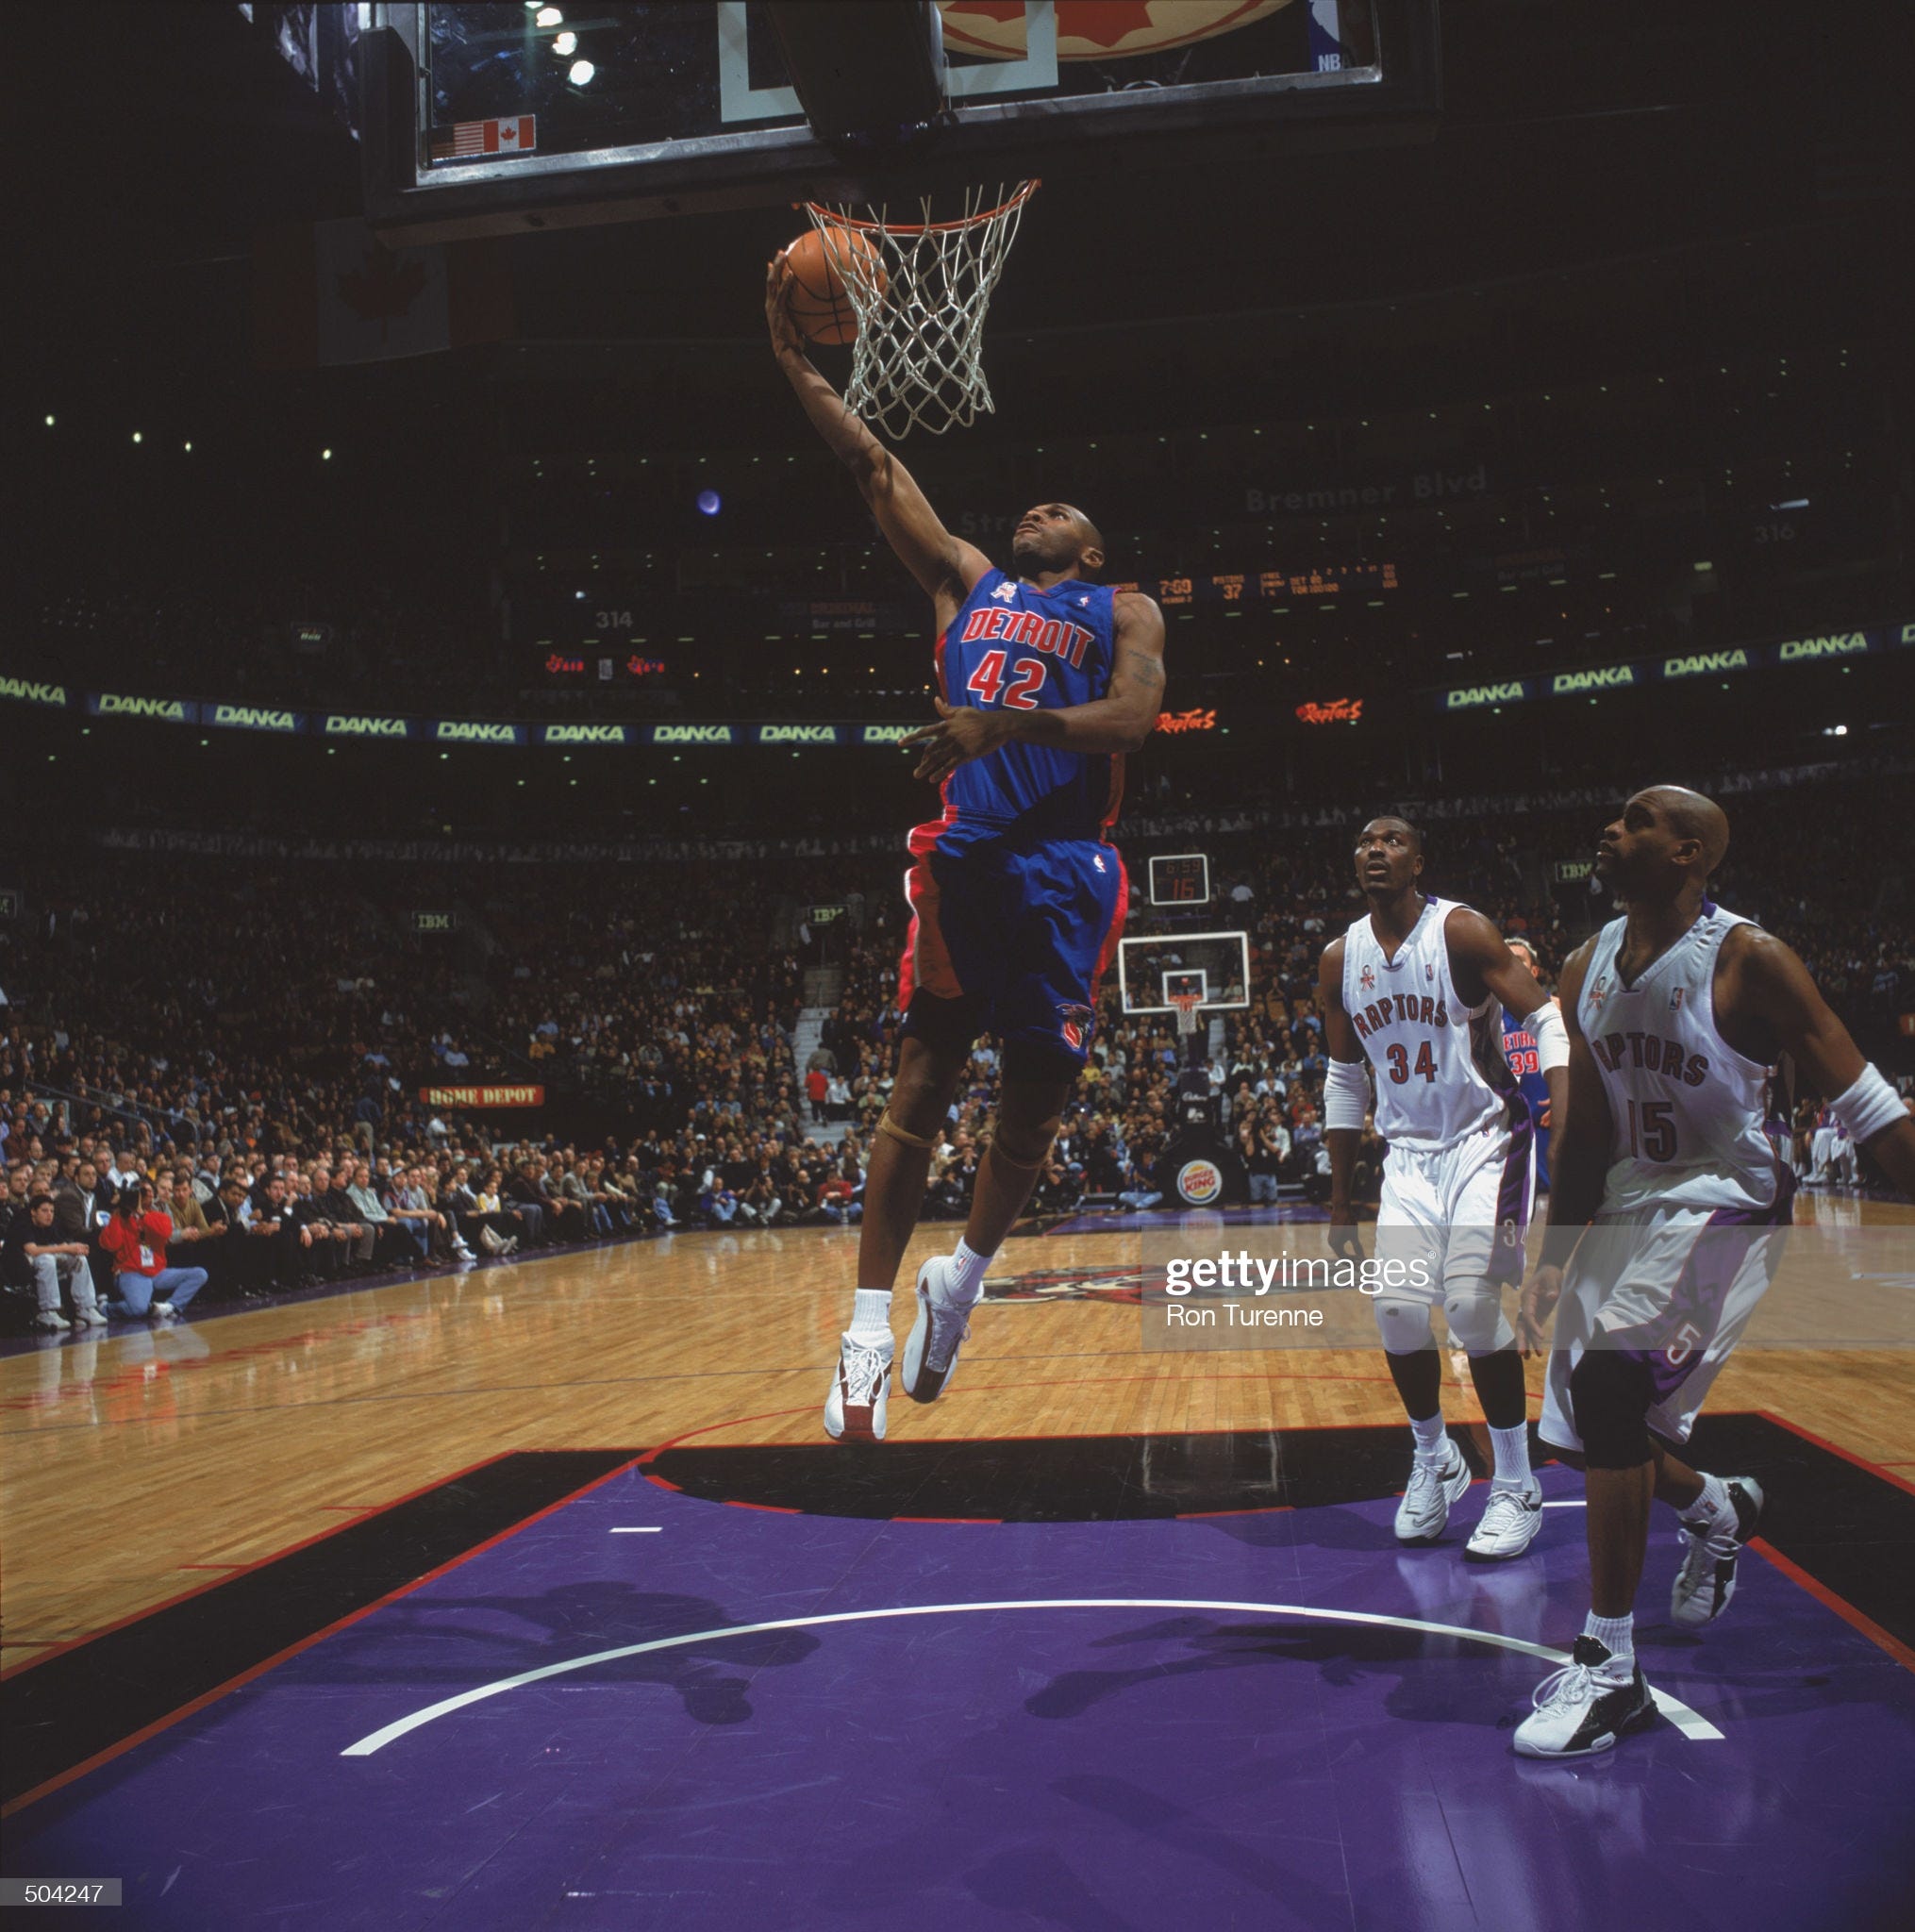 Dell Curry's Last Game 17pts 3/3 3pt - 2002 Playoffs R1G5 - Toronto Raptors  @ Detroit Pistons 